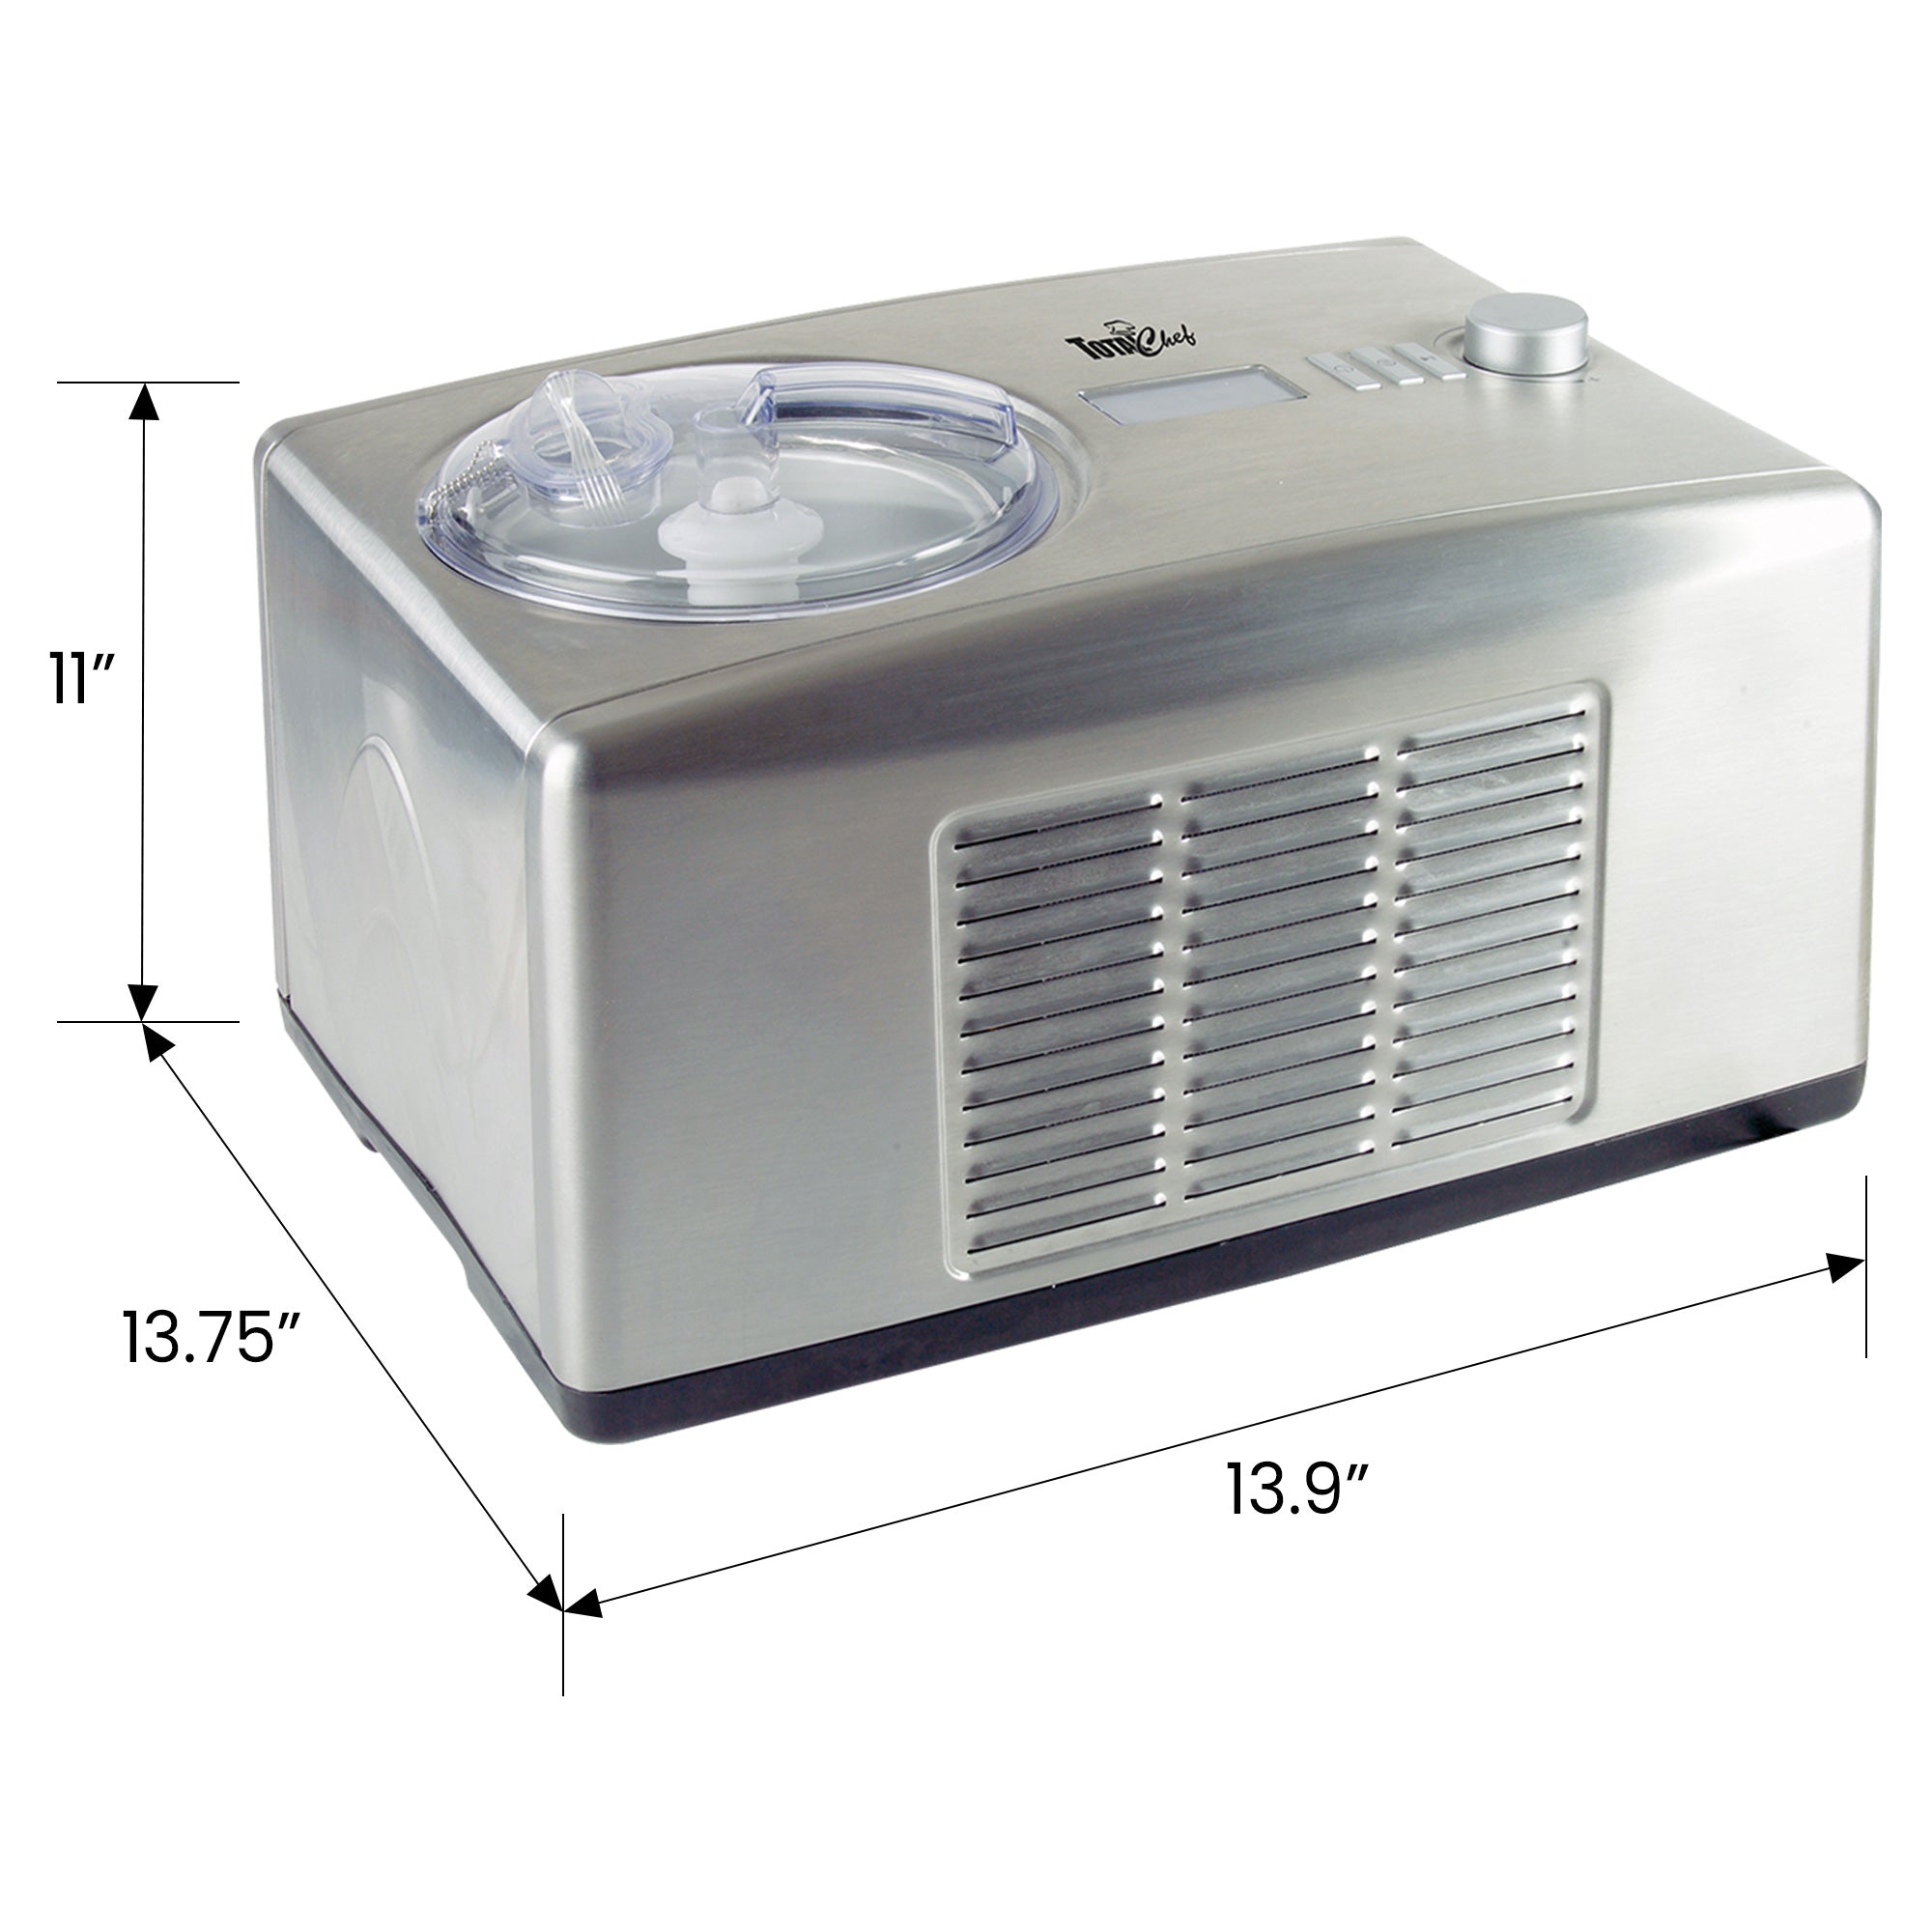 Product shot of automatic ice cream maker on white background with dimensions